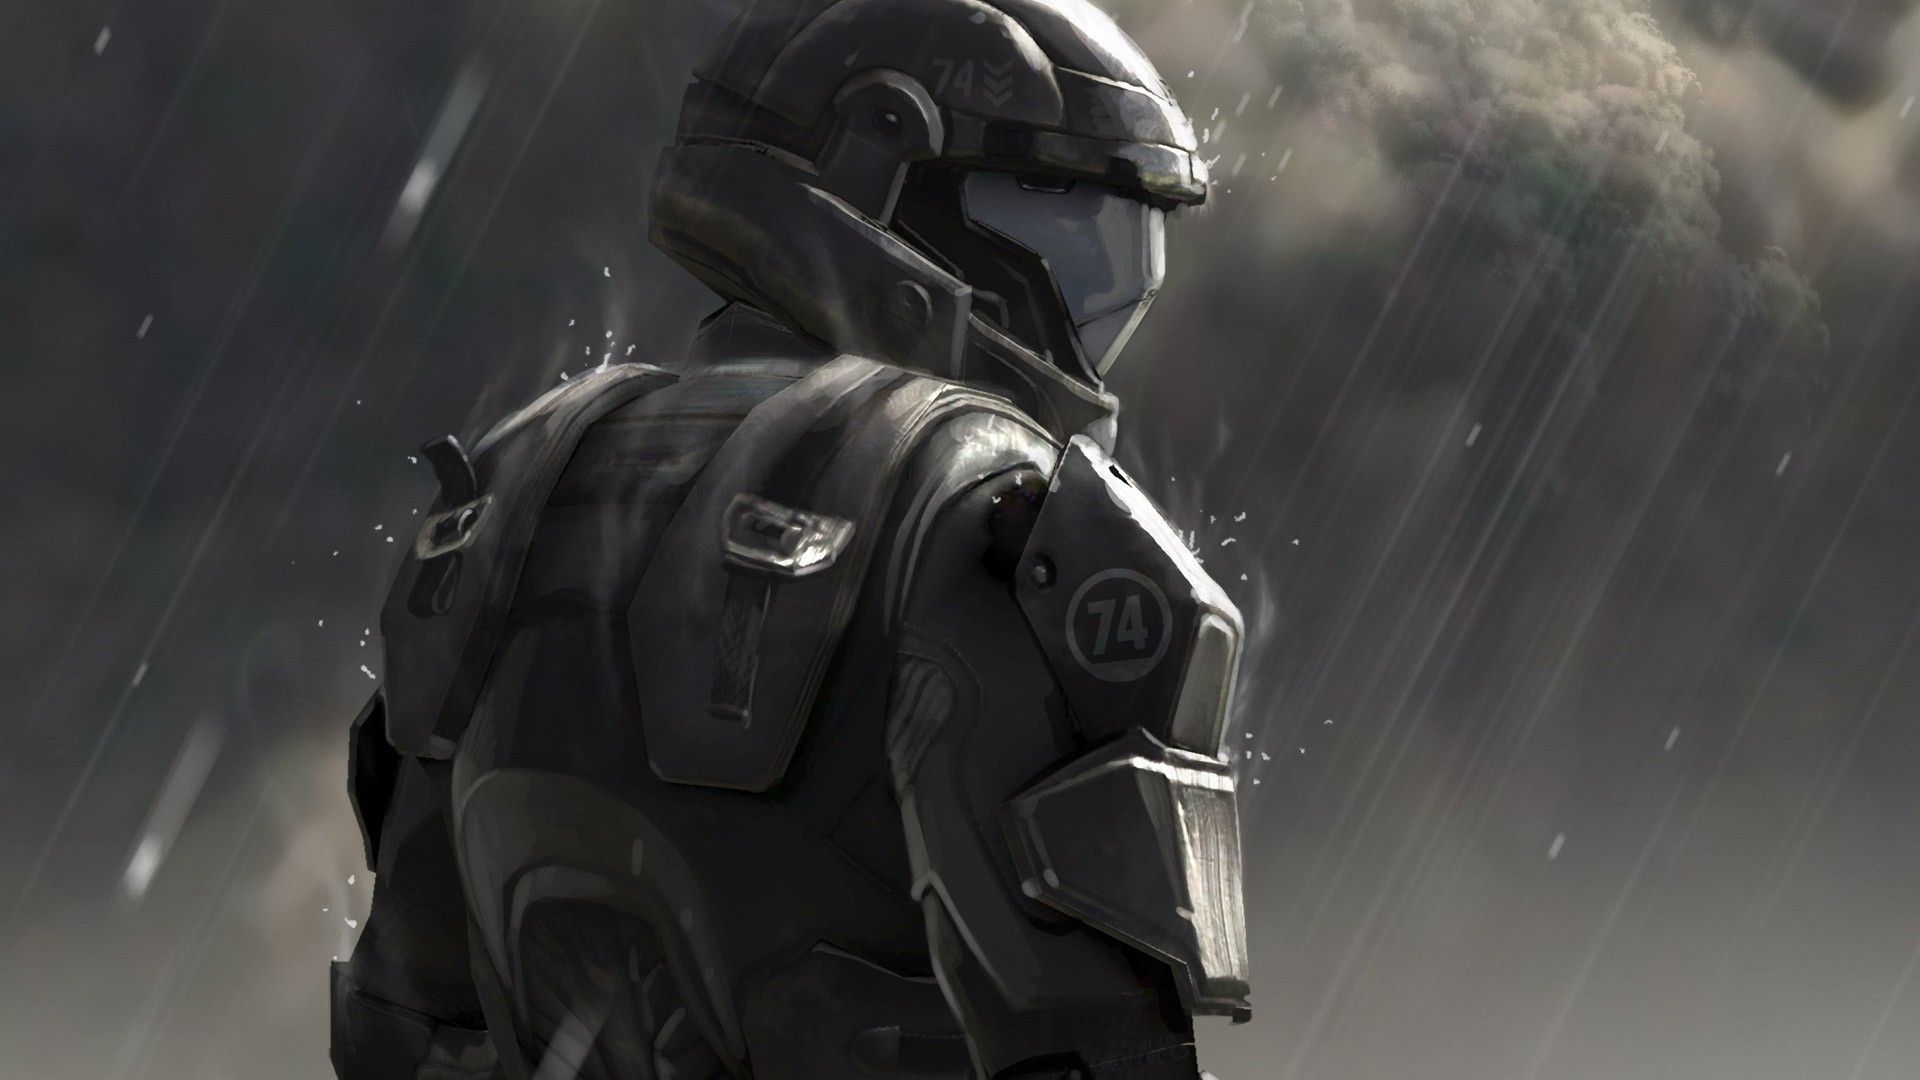 General 1920x1080 Halo Master Chief Halo 3: ODST. Halo background, Halo armor, Halo